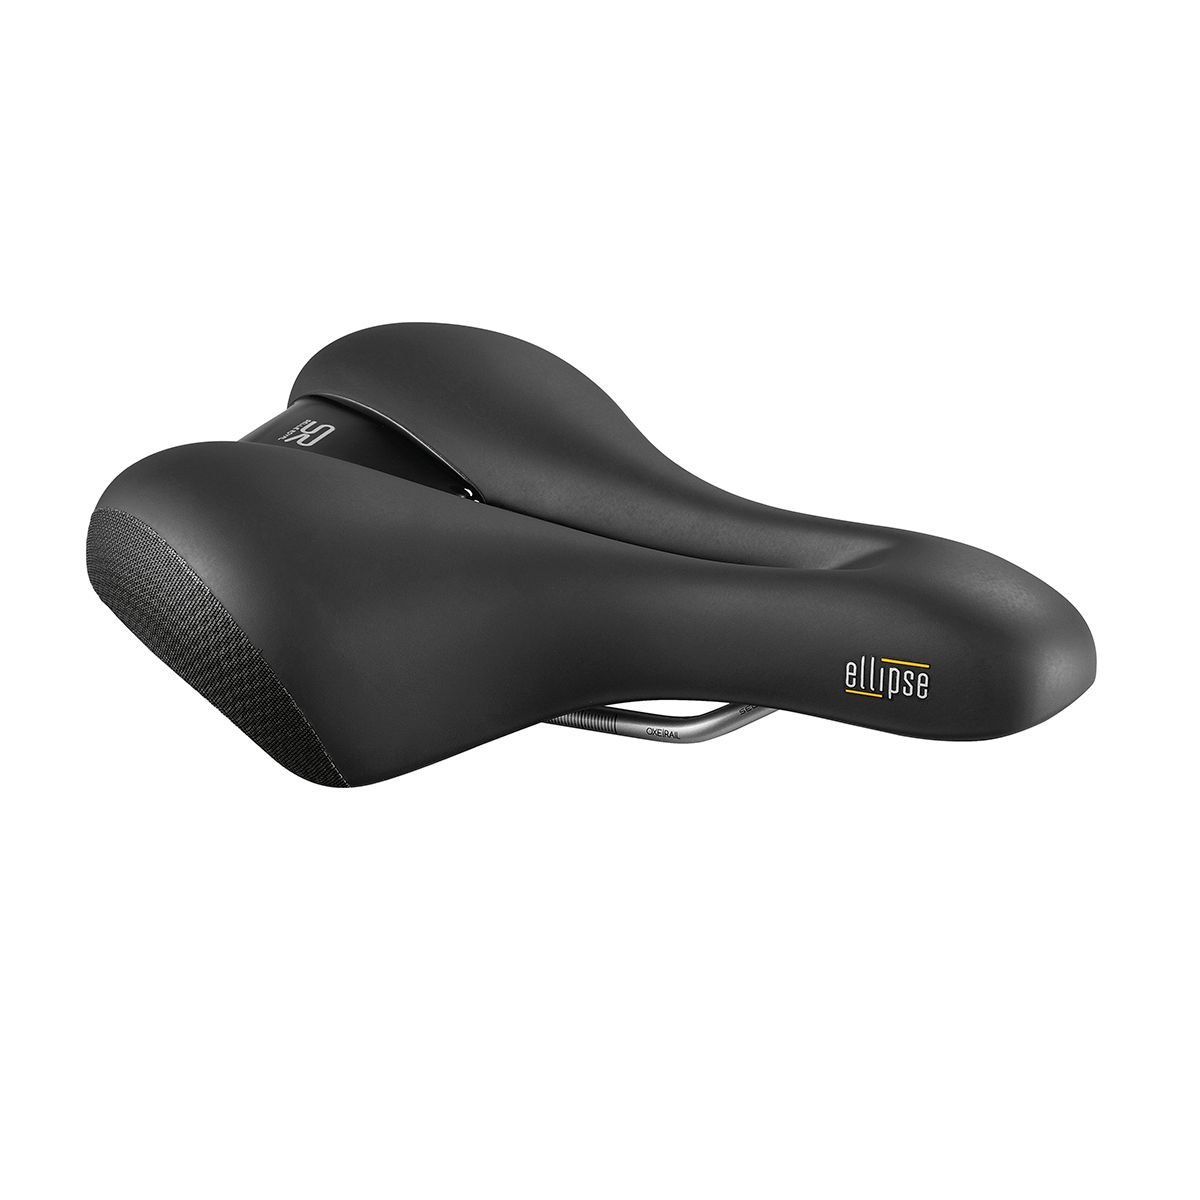 Седло Selle Royal Ellipse Moderate, женское, 51B6DE0A09321 седло selle royal freeway fit moderate жен 8v97dr0a08069